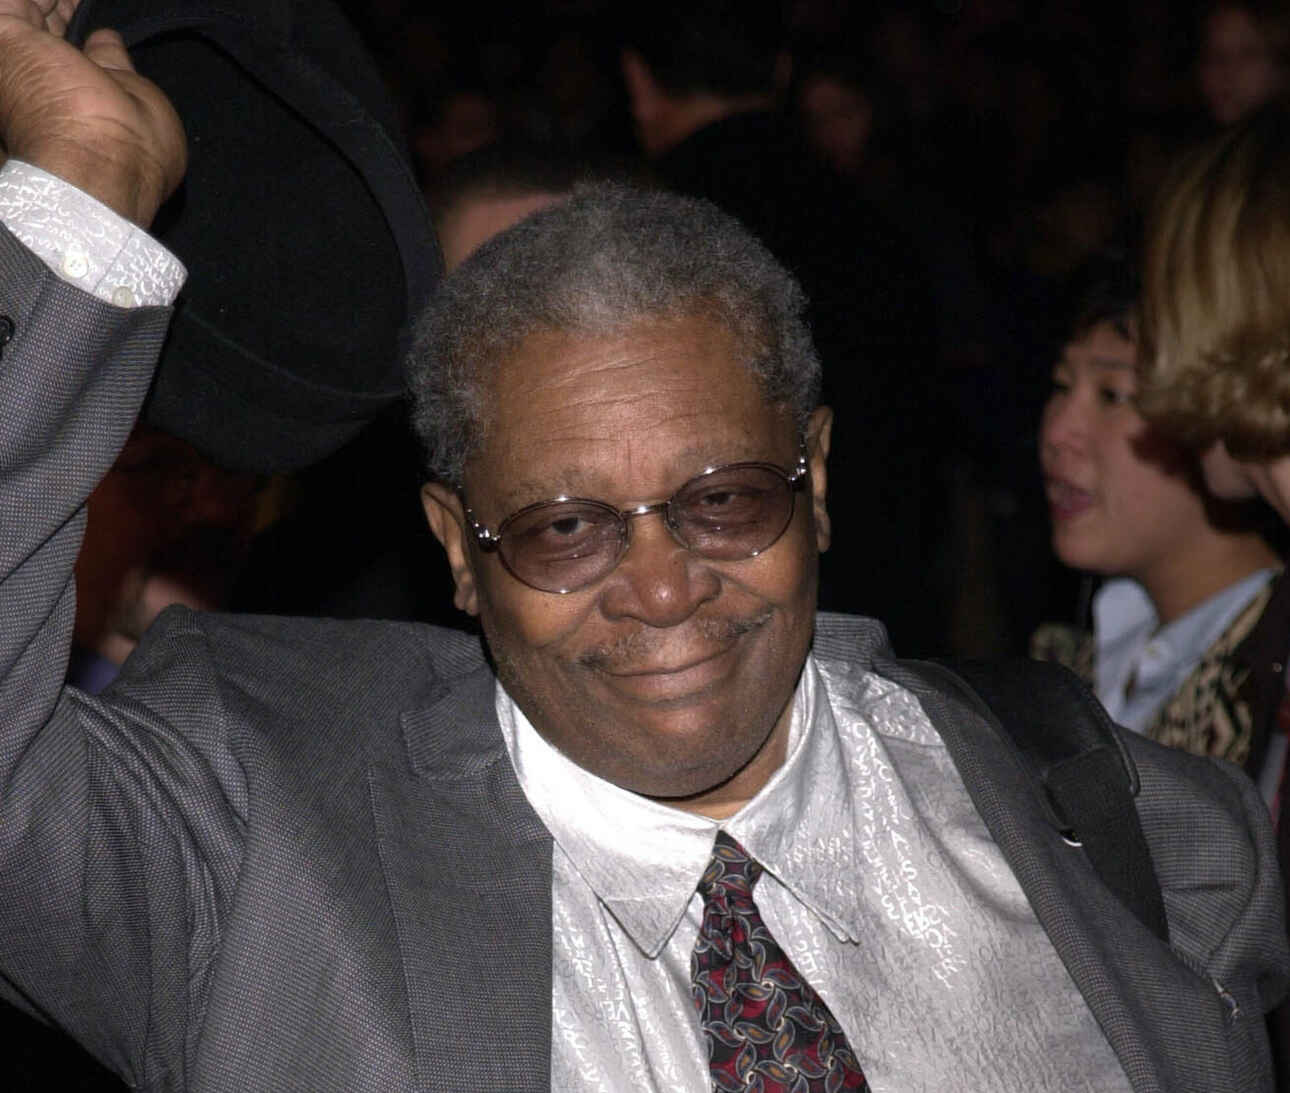 BB King, wearing a grey suit and a brown tie, is waving his hand.